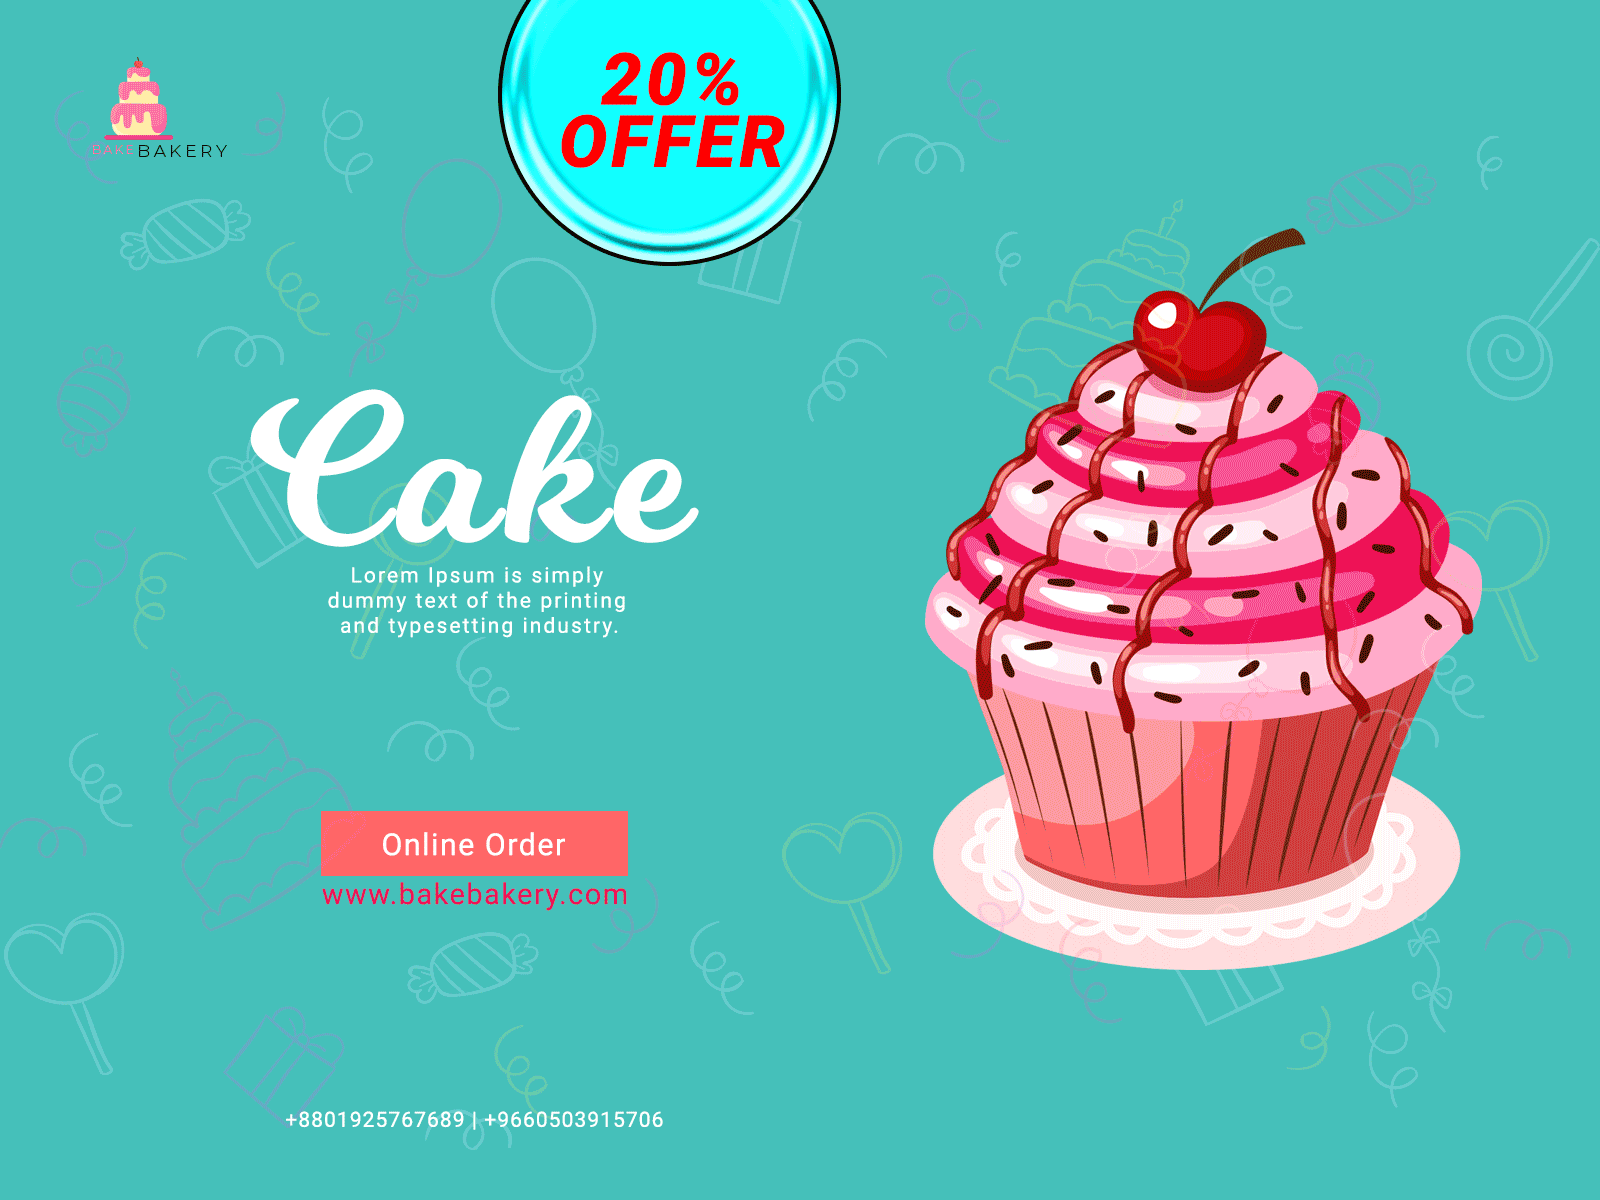 Cake Shop Launching Offer Design Templates